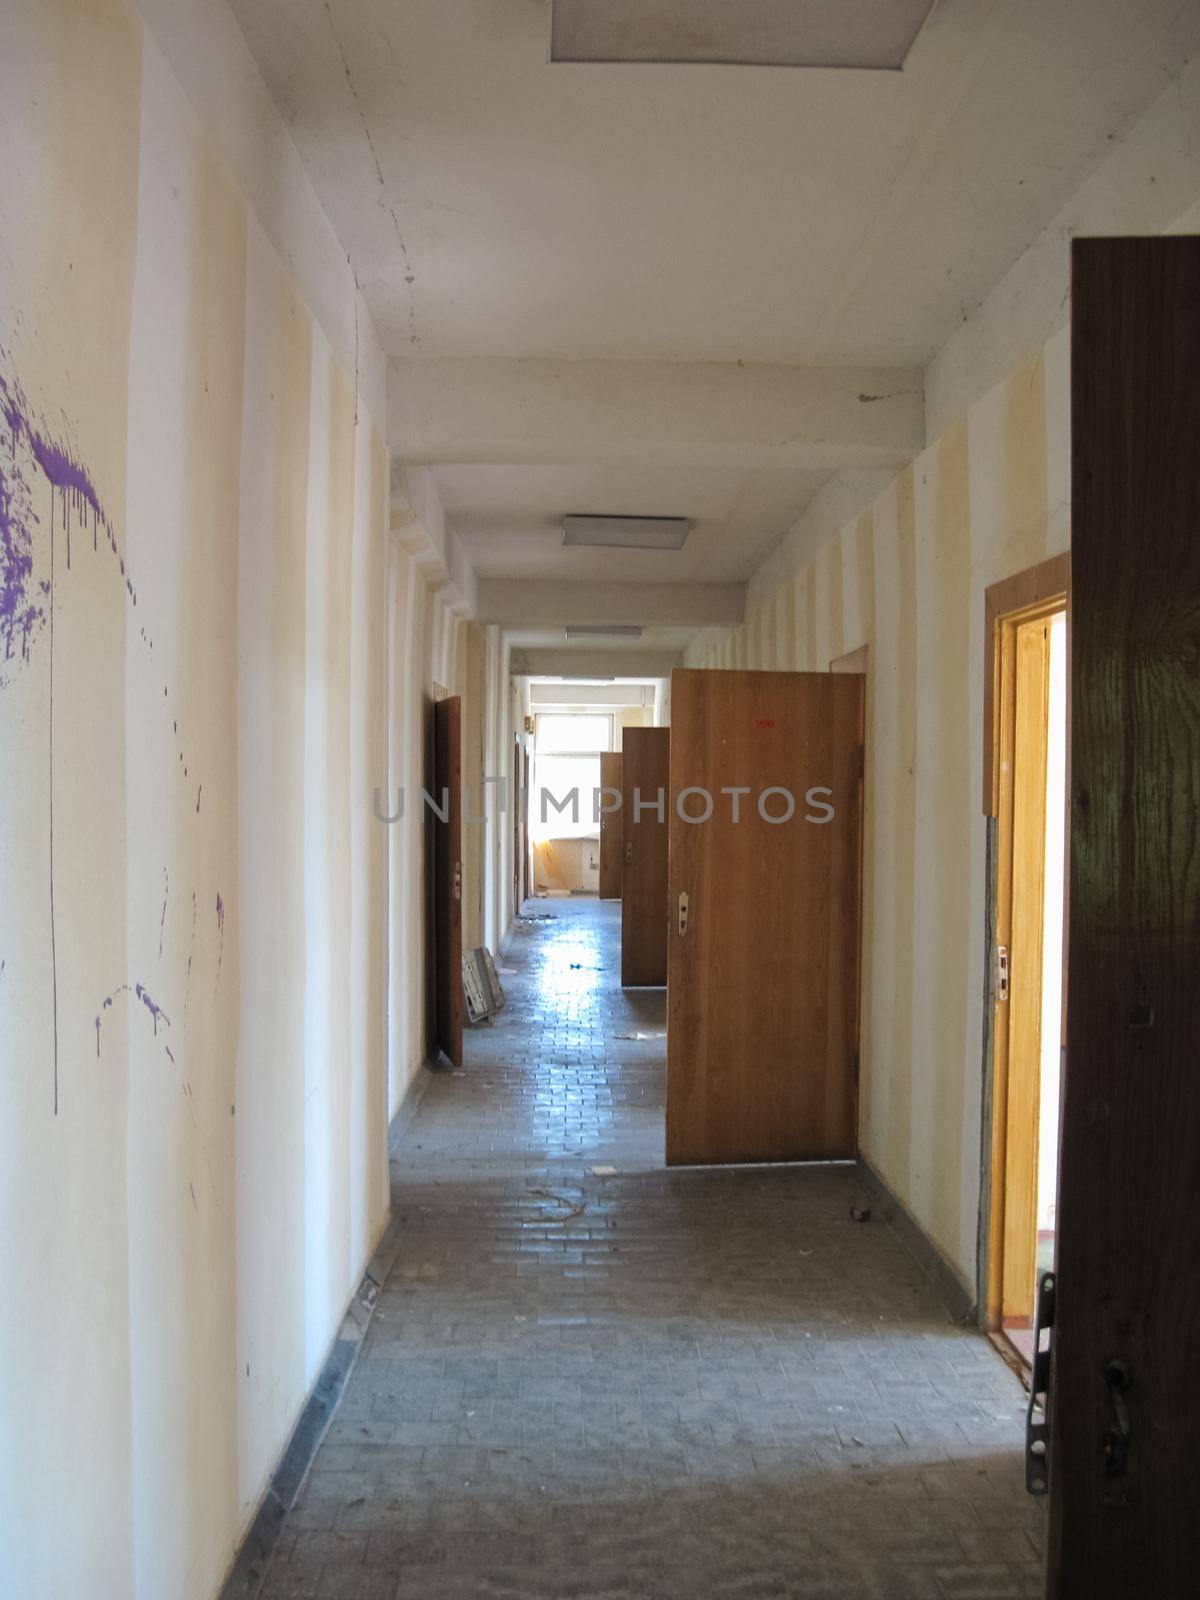 Rooms and corridors of abandoned industrial building of Chigirin nuclear power plant by DePo